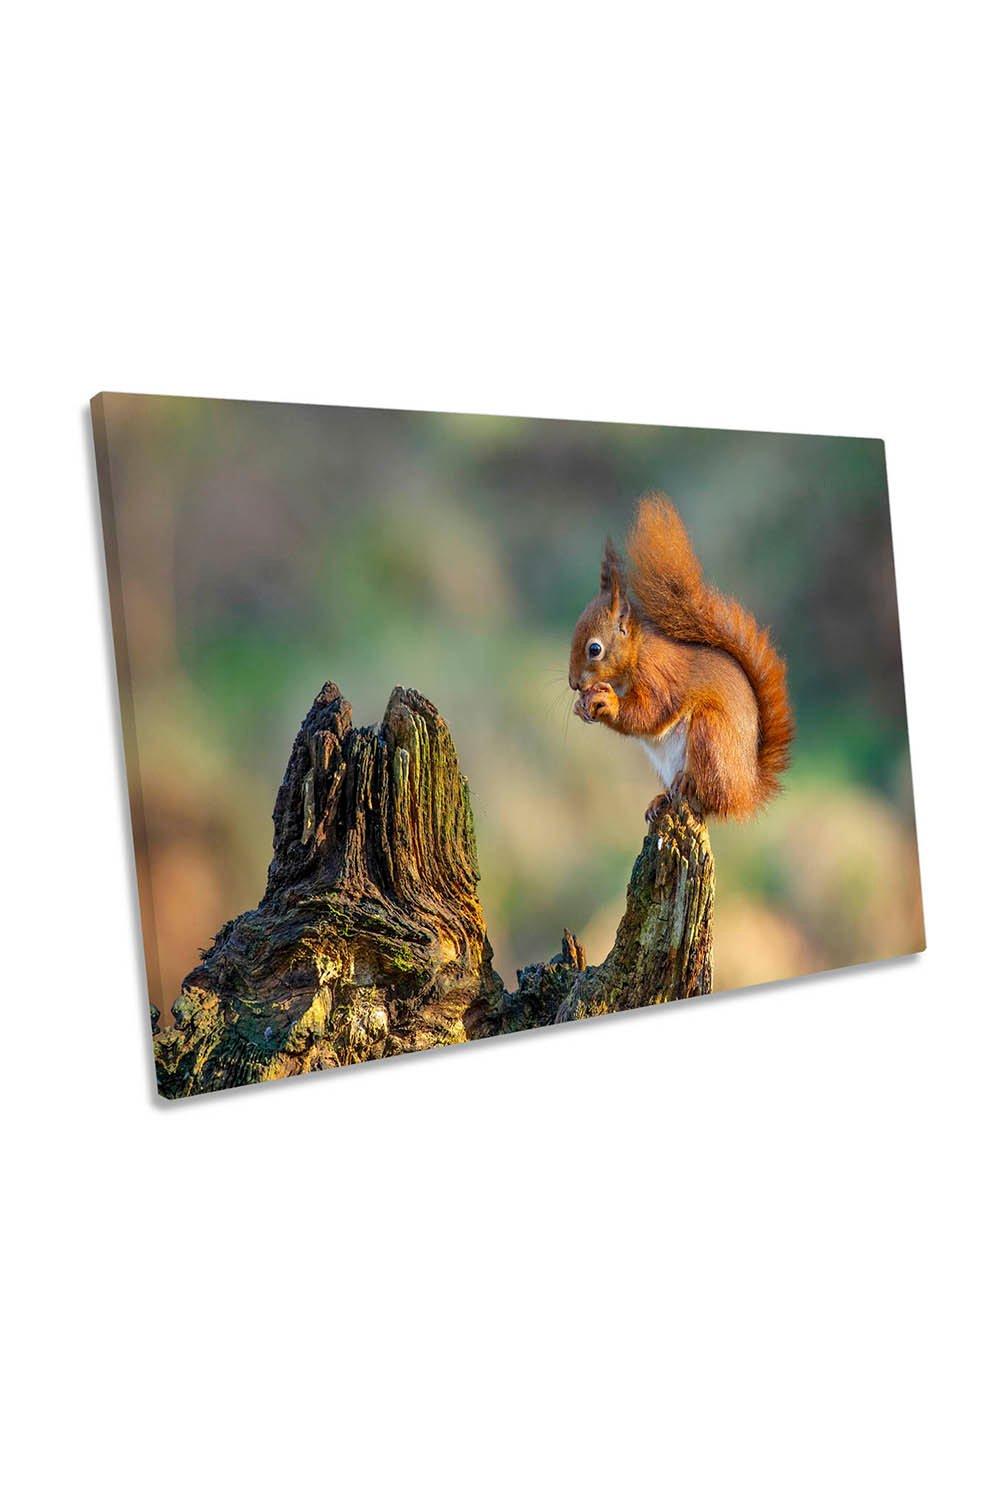 Red Squirrel Eating Nuts Wildlife Canvas Wall Art Picture Print